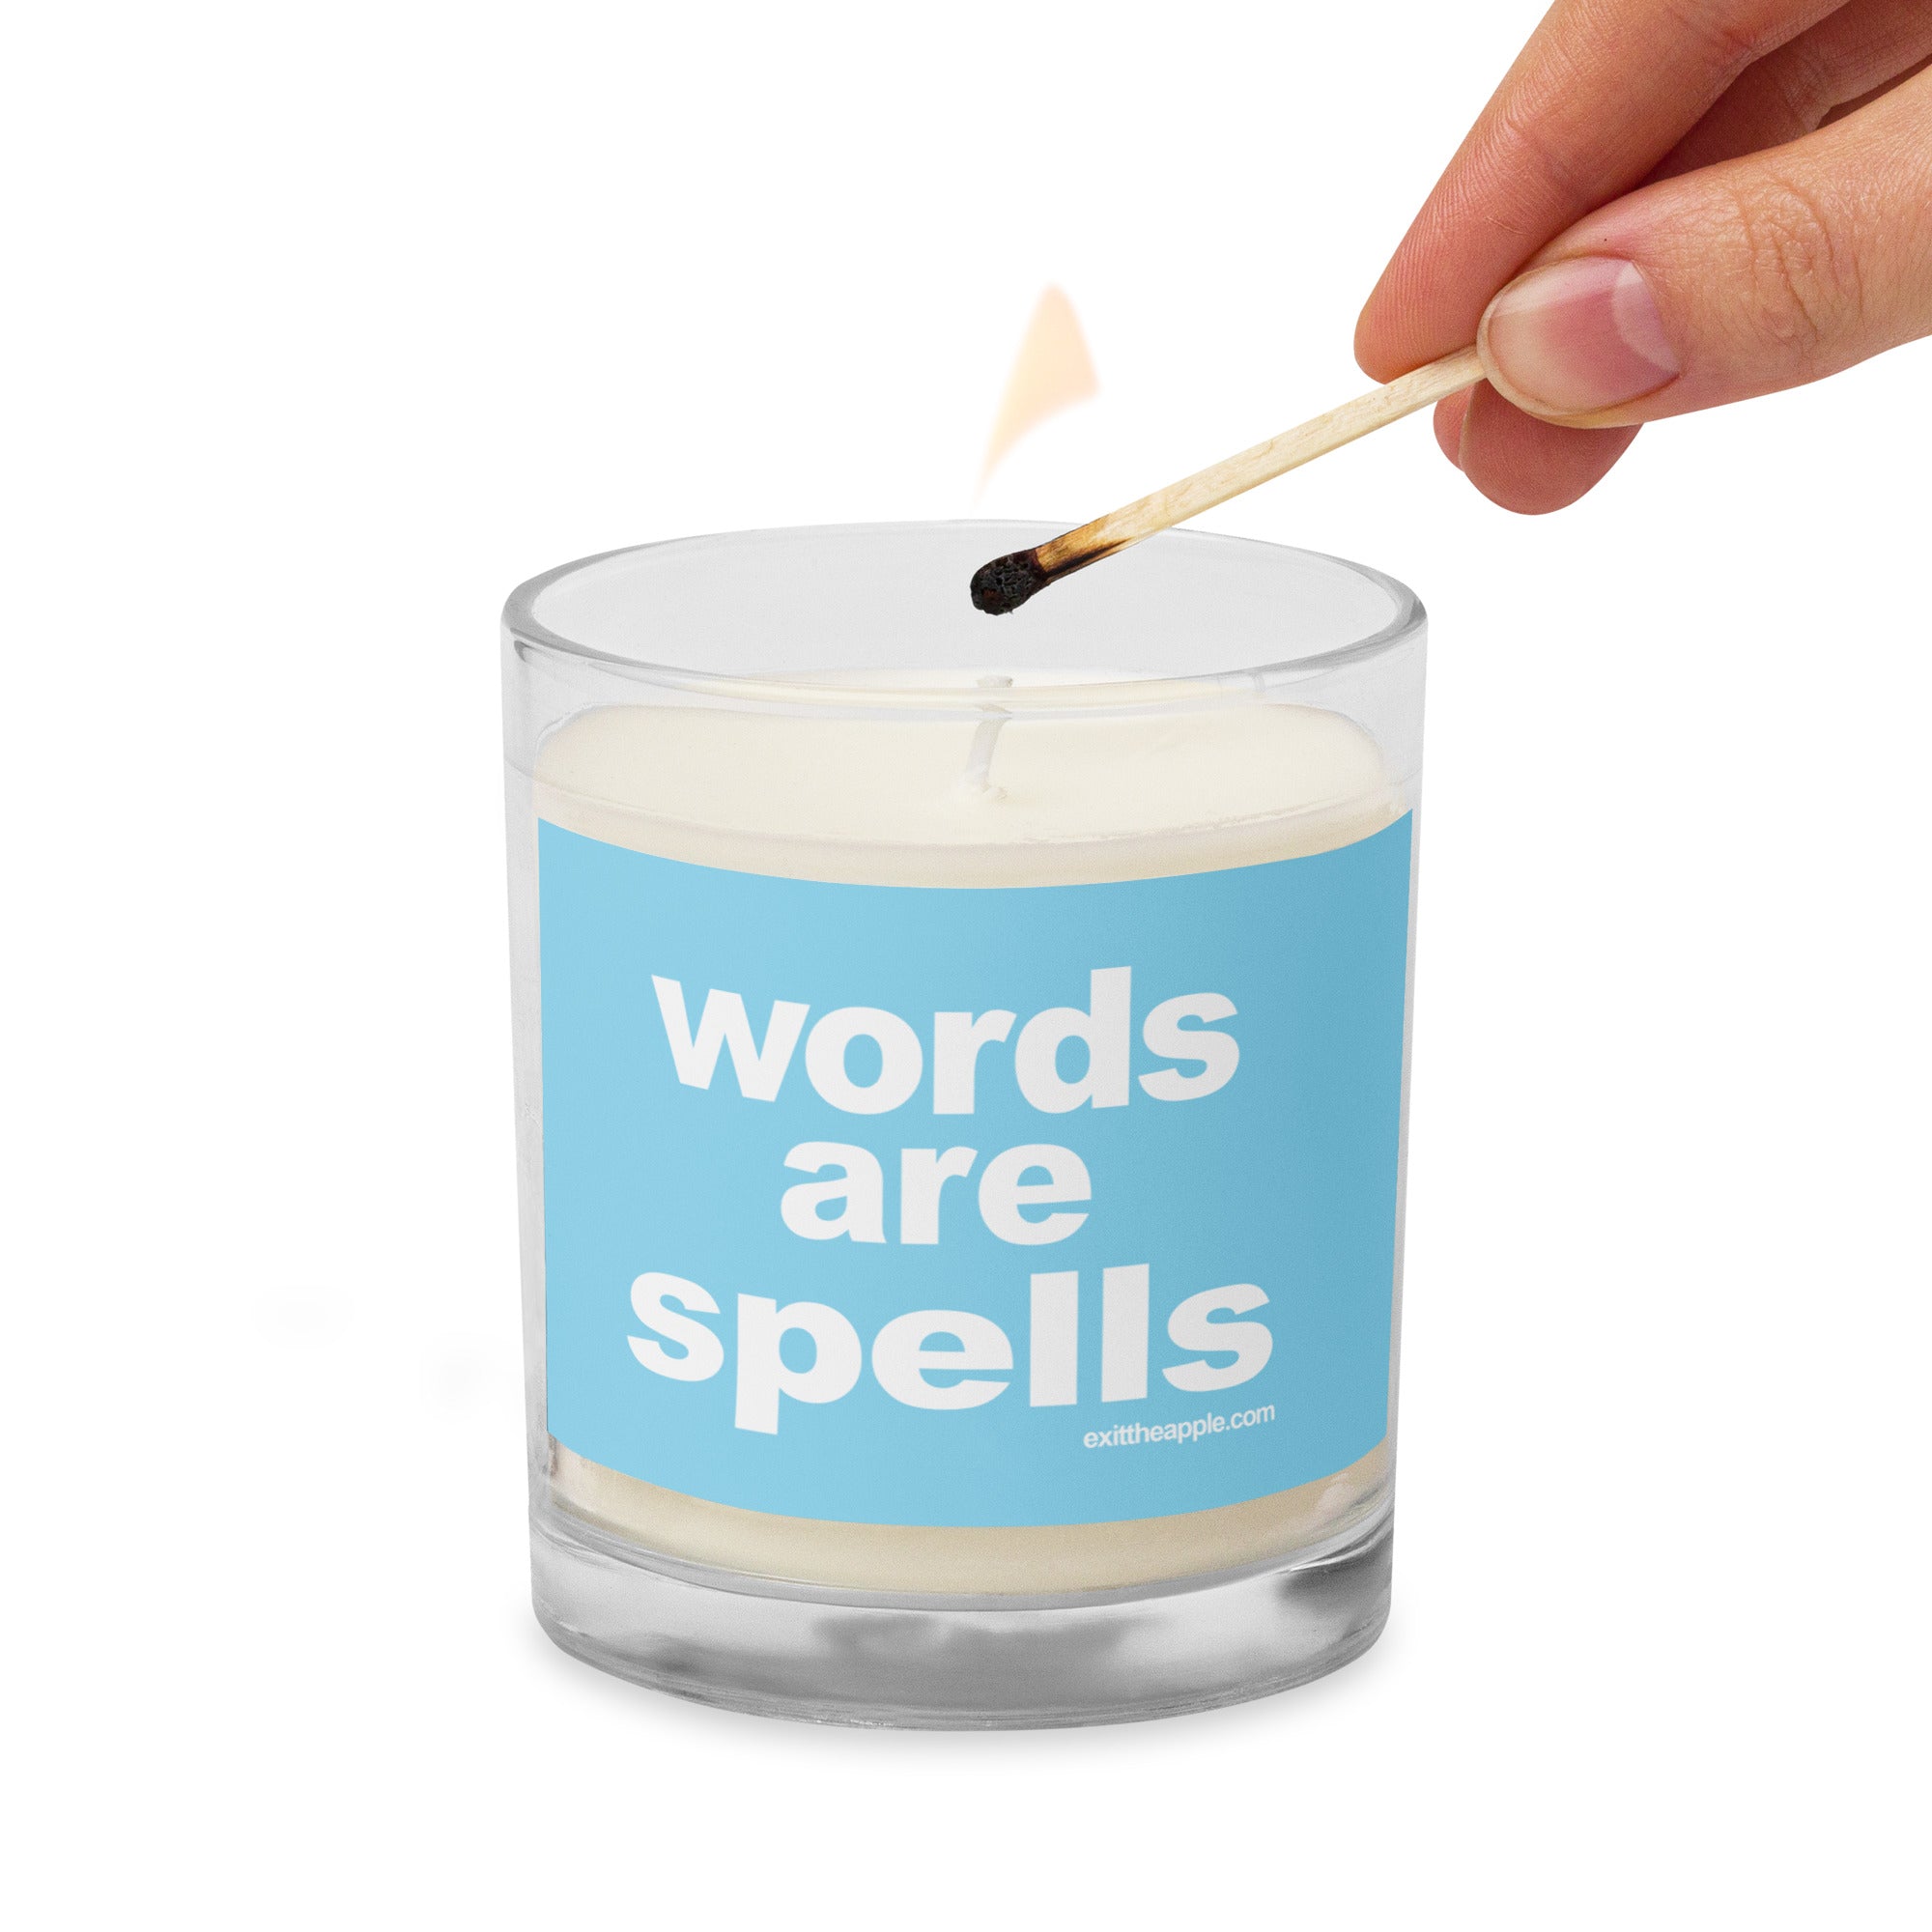 WORDS ARE SPELLS Glass jar soy wax candle